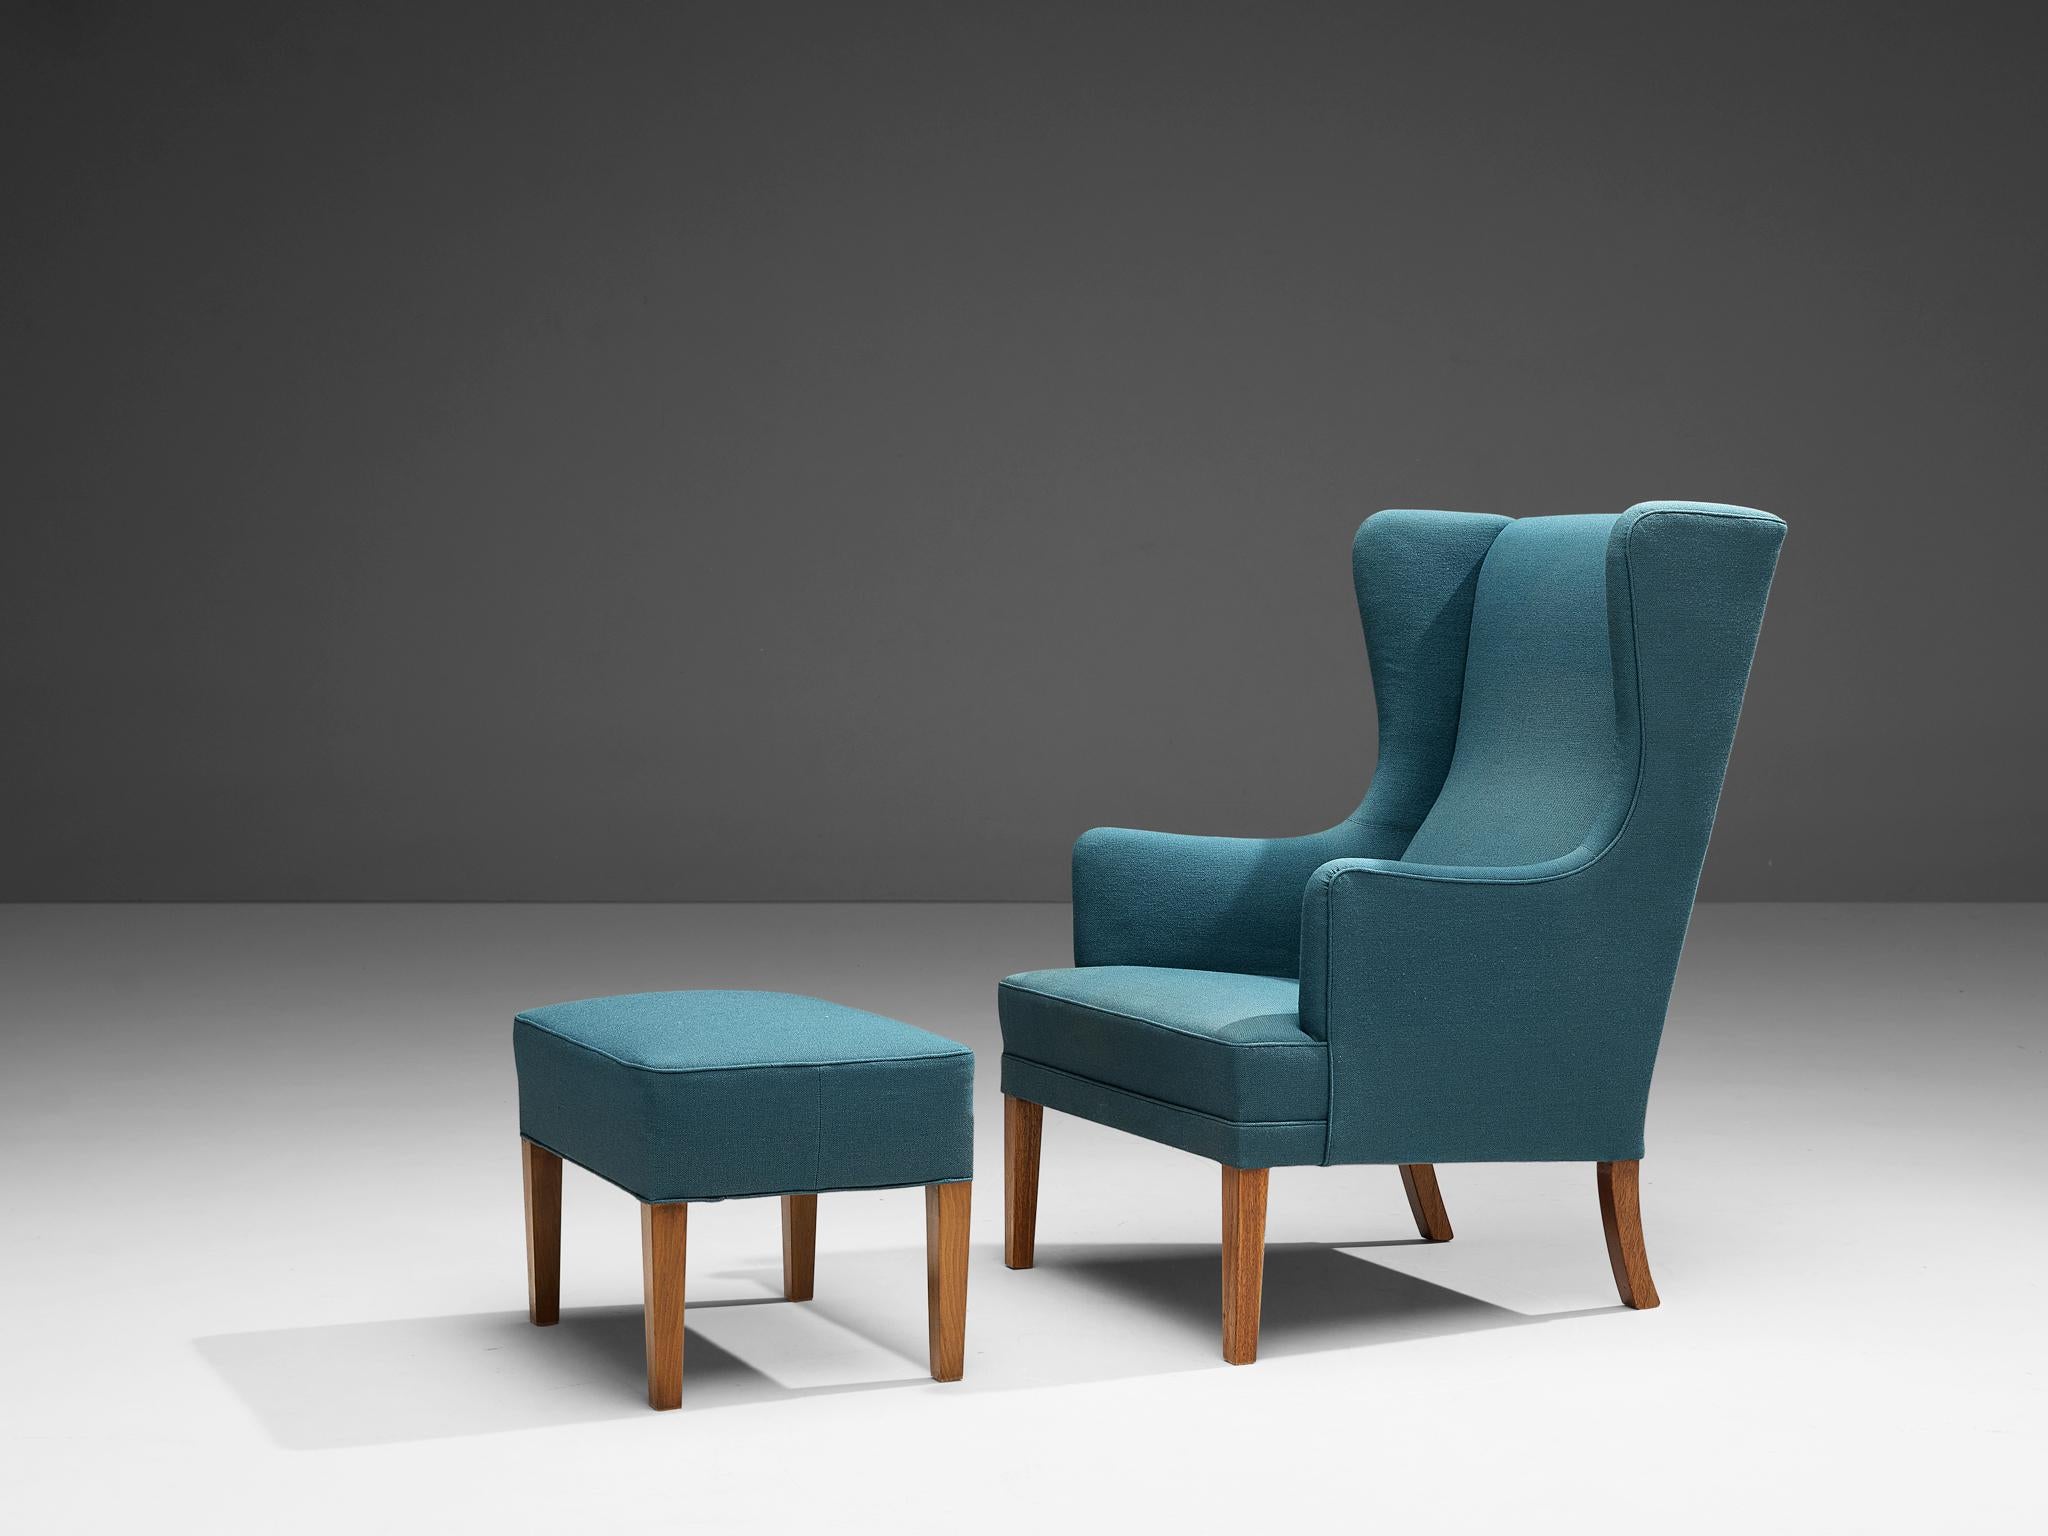 Armchair, fabric, oak, Denmark, 1950s.

This archetypical wingback chair and ottoman of the 1950s is both extremely comfortable and pleasing to the eyes. Soft edges, tilted shapes and muted colors make this a truly mid-modern armchair from Denmark.